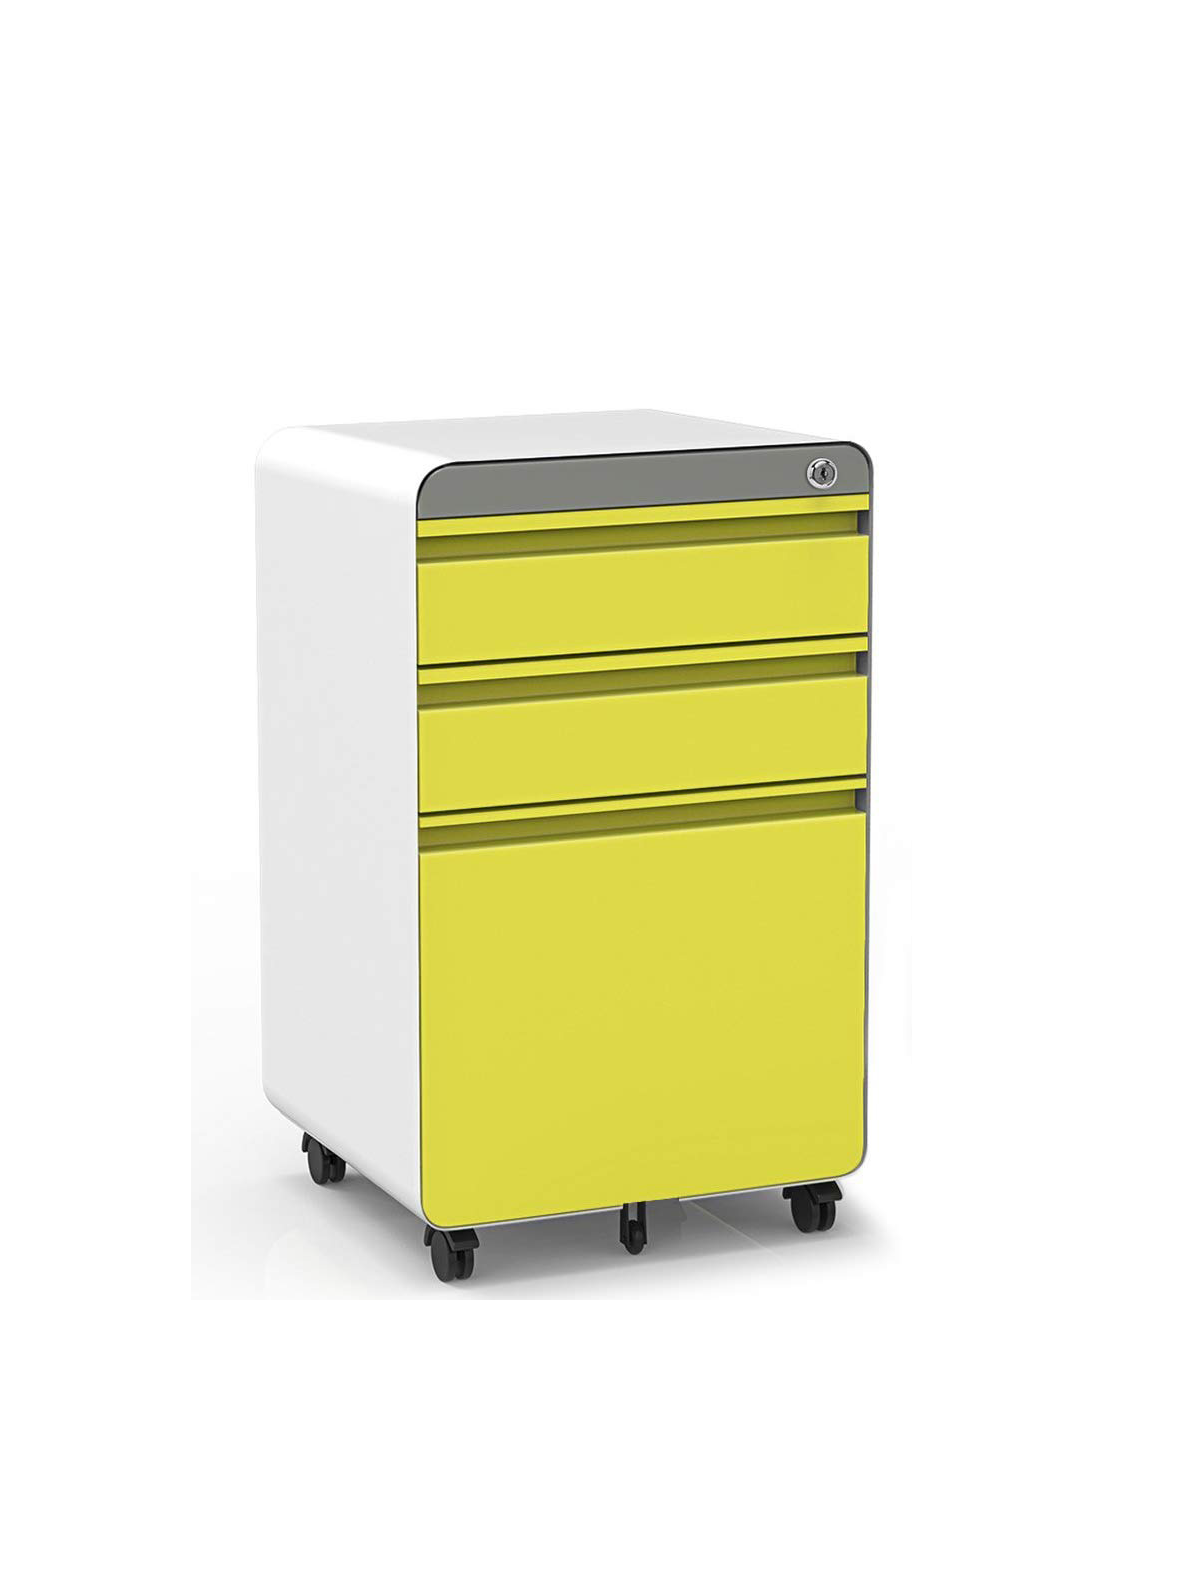 DR -CA-3R - indesignegypt metal furniture lockers heavy use